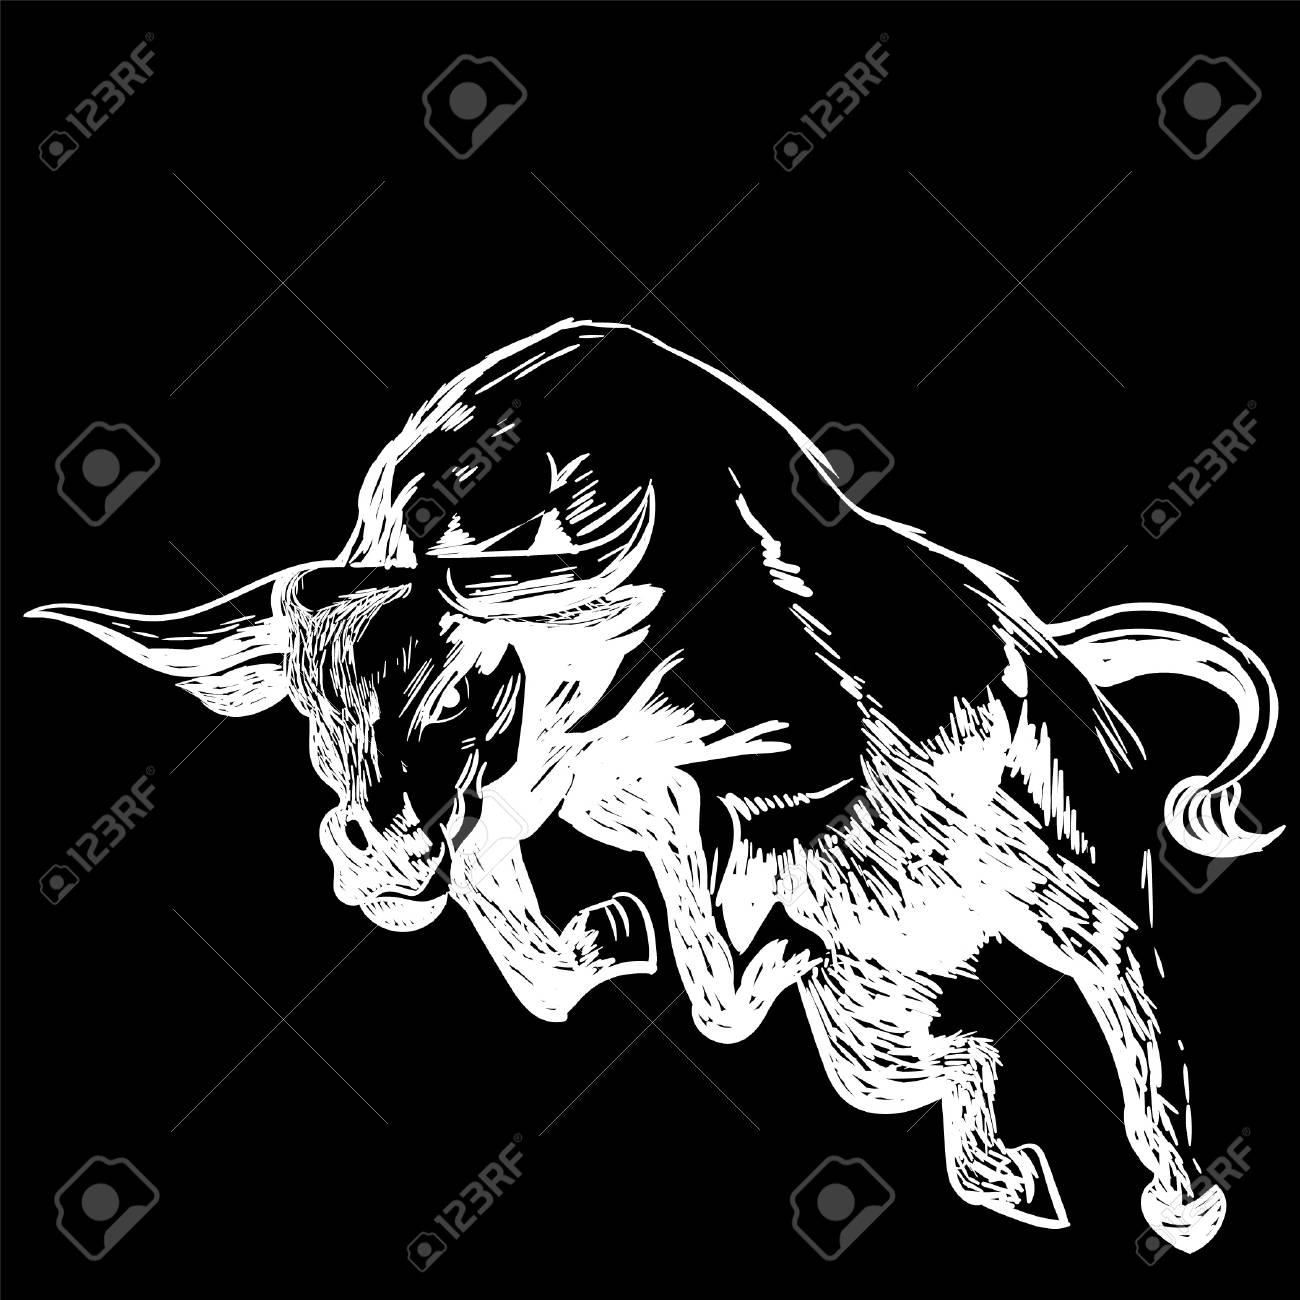 Bull Painted With A White Pen On The Black Background Royalty